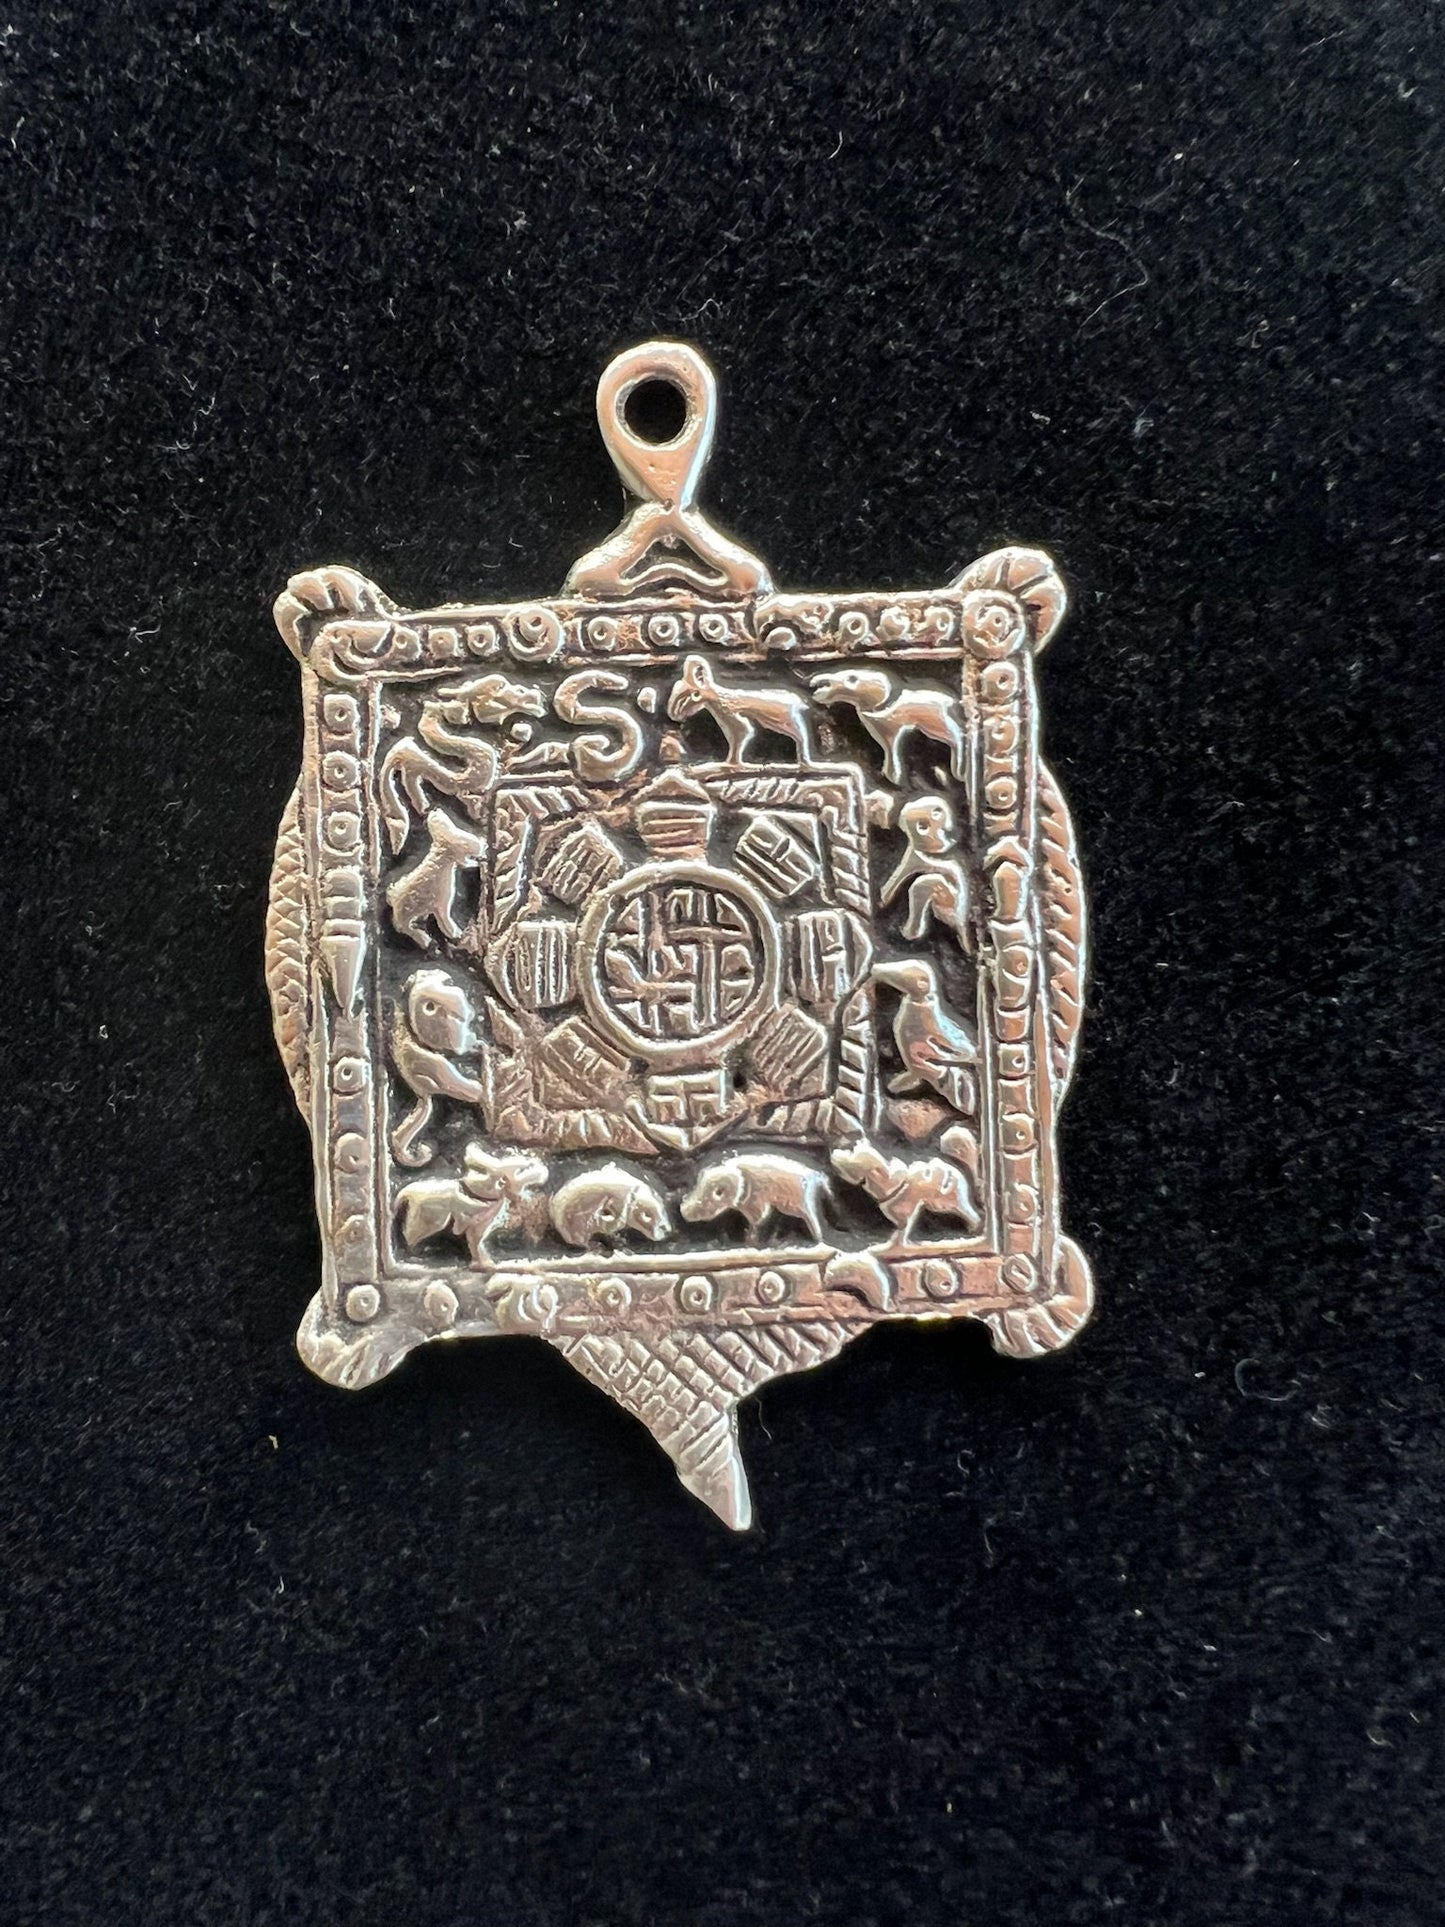 Tibetan Astrological Amulet | Metal | 2 in by 3 in | Protection Blessing | Zodiac | 8 Trigrams | 9 Magic Squares | Feng Shui | Astrology